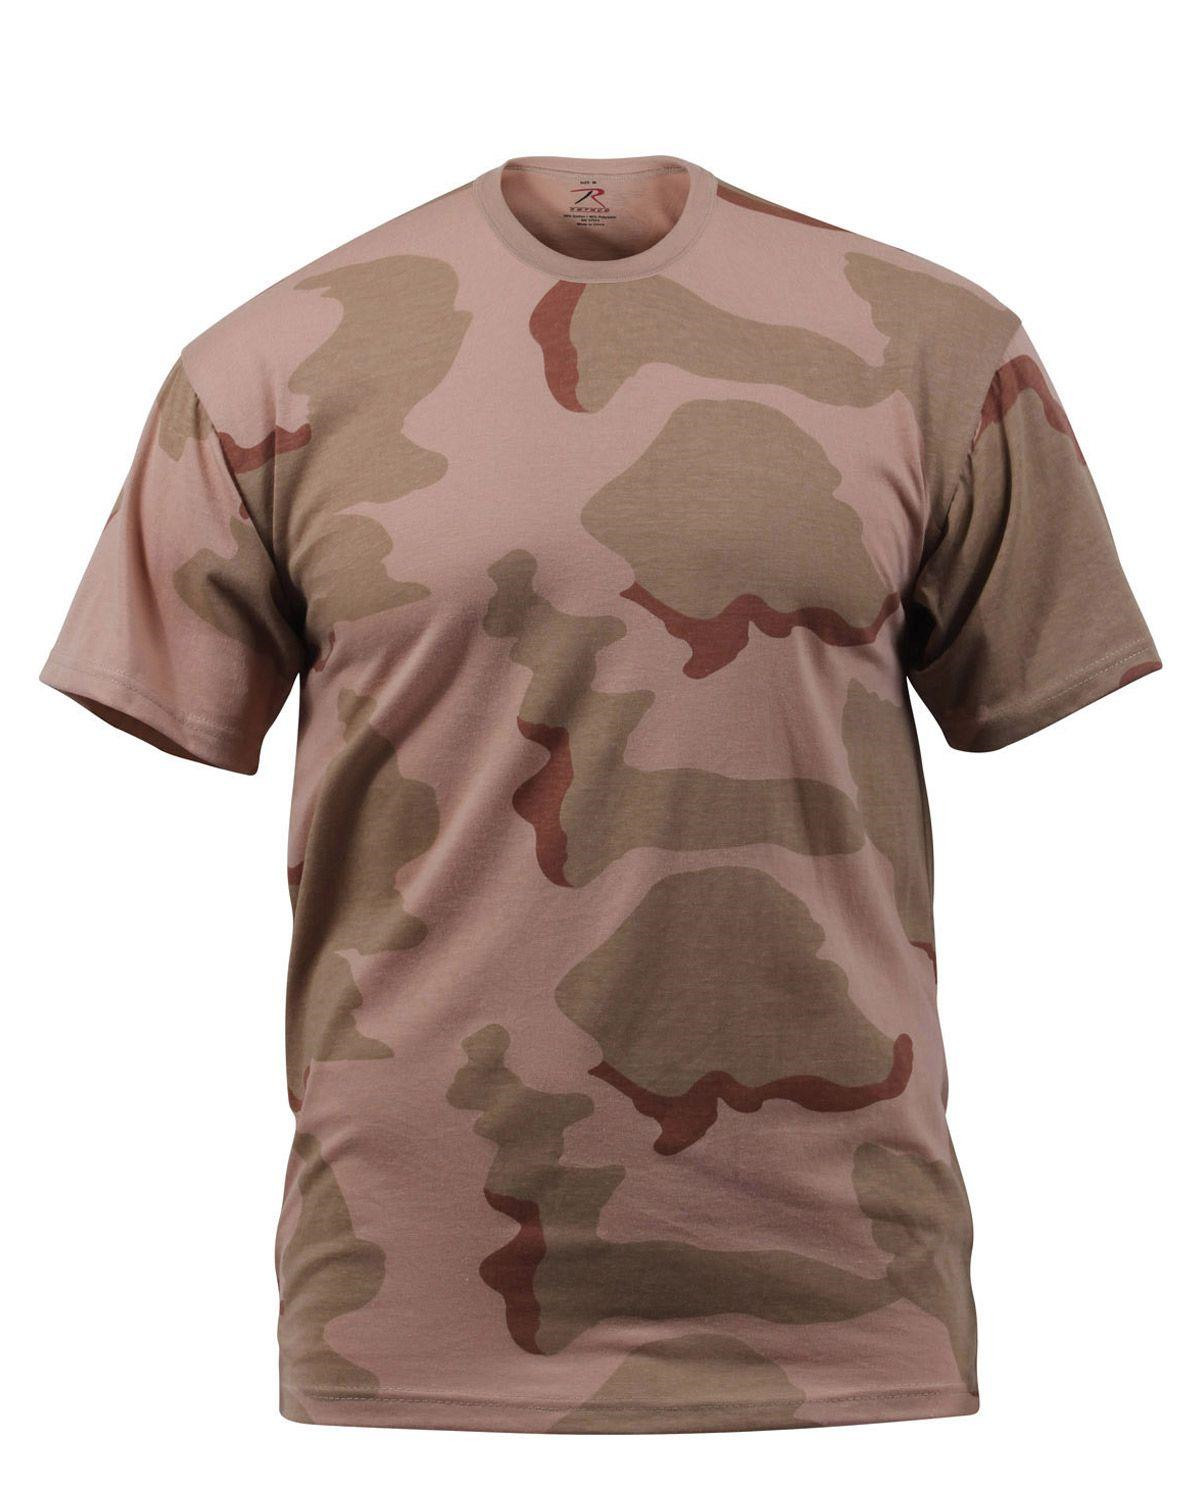 Rothco T-shirt - Mange Camouflager (Tri-Color, XL)